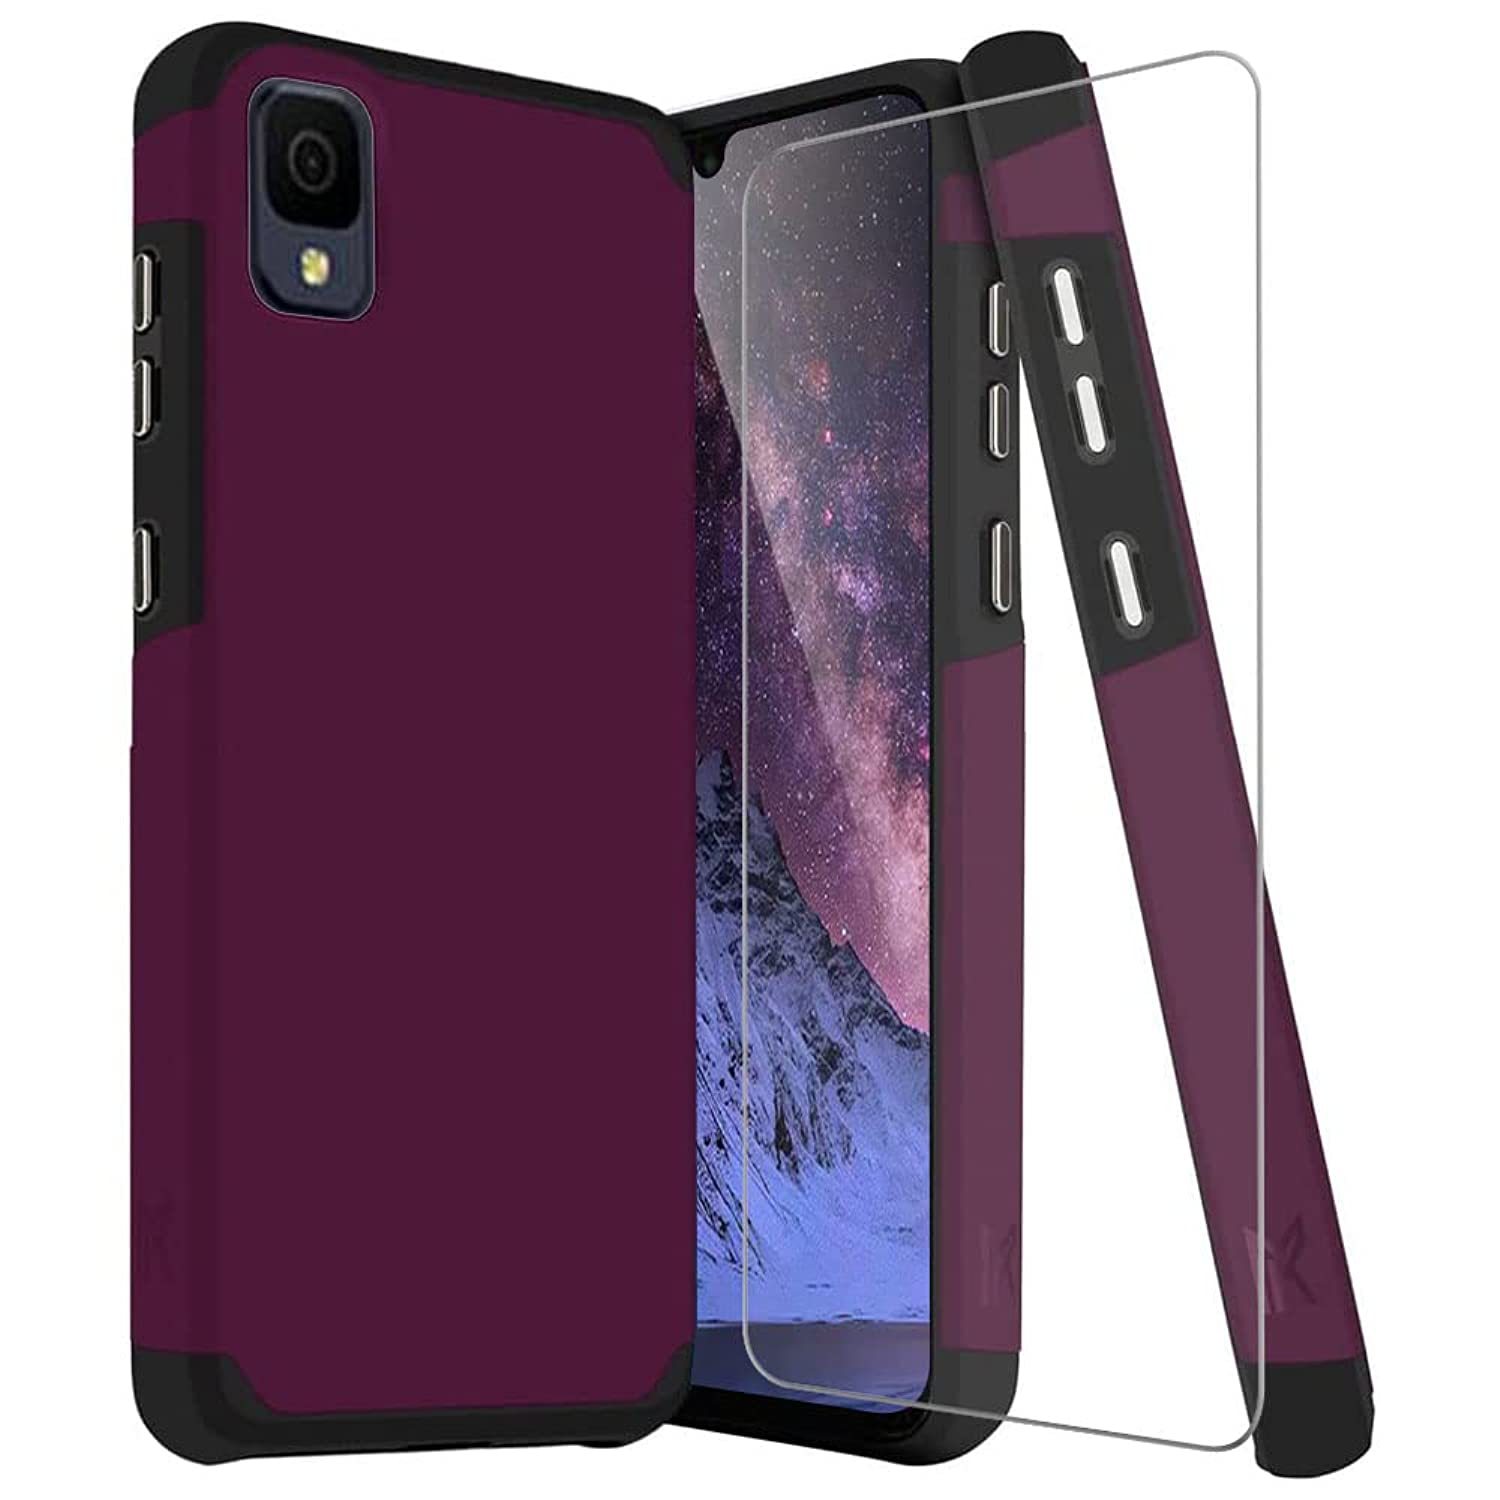 For Alcatel Tcl 30 Z T602Dl Case, Tcl 30 Le Case, With Tempered Glass Screen Pro - $19.99